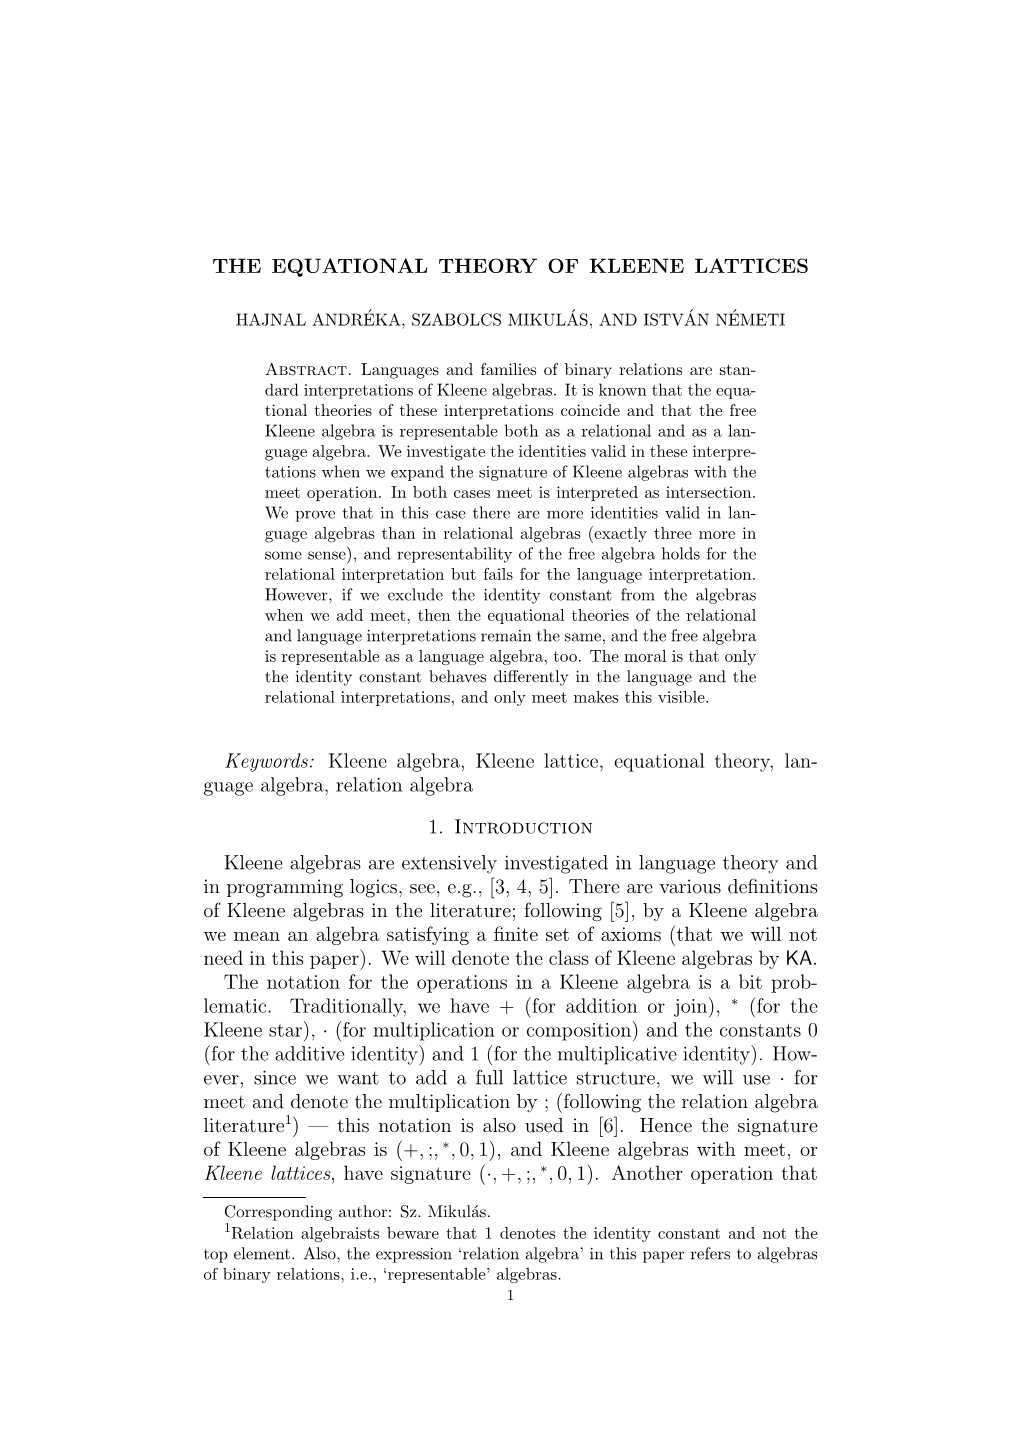 The Equational Theory of Kleene Lattices